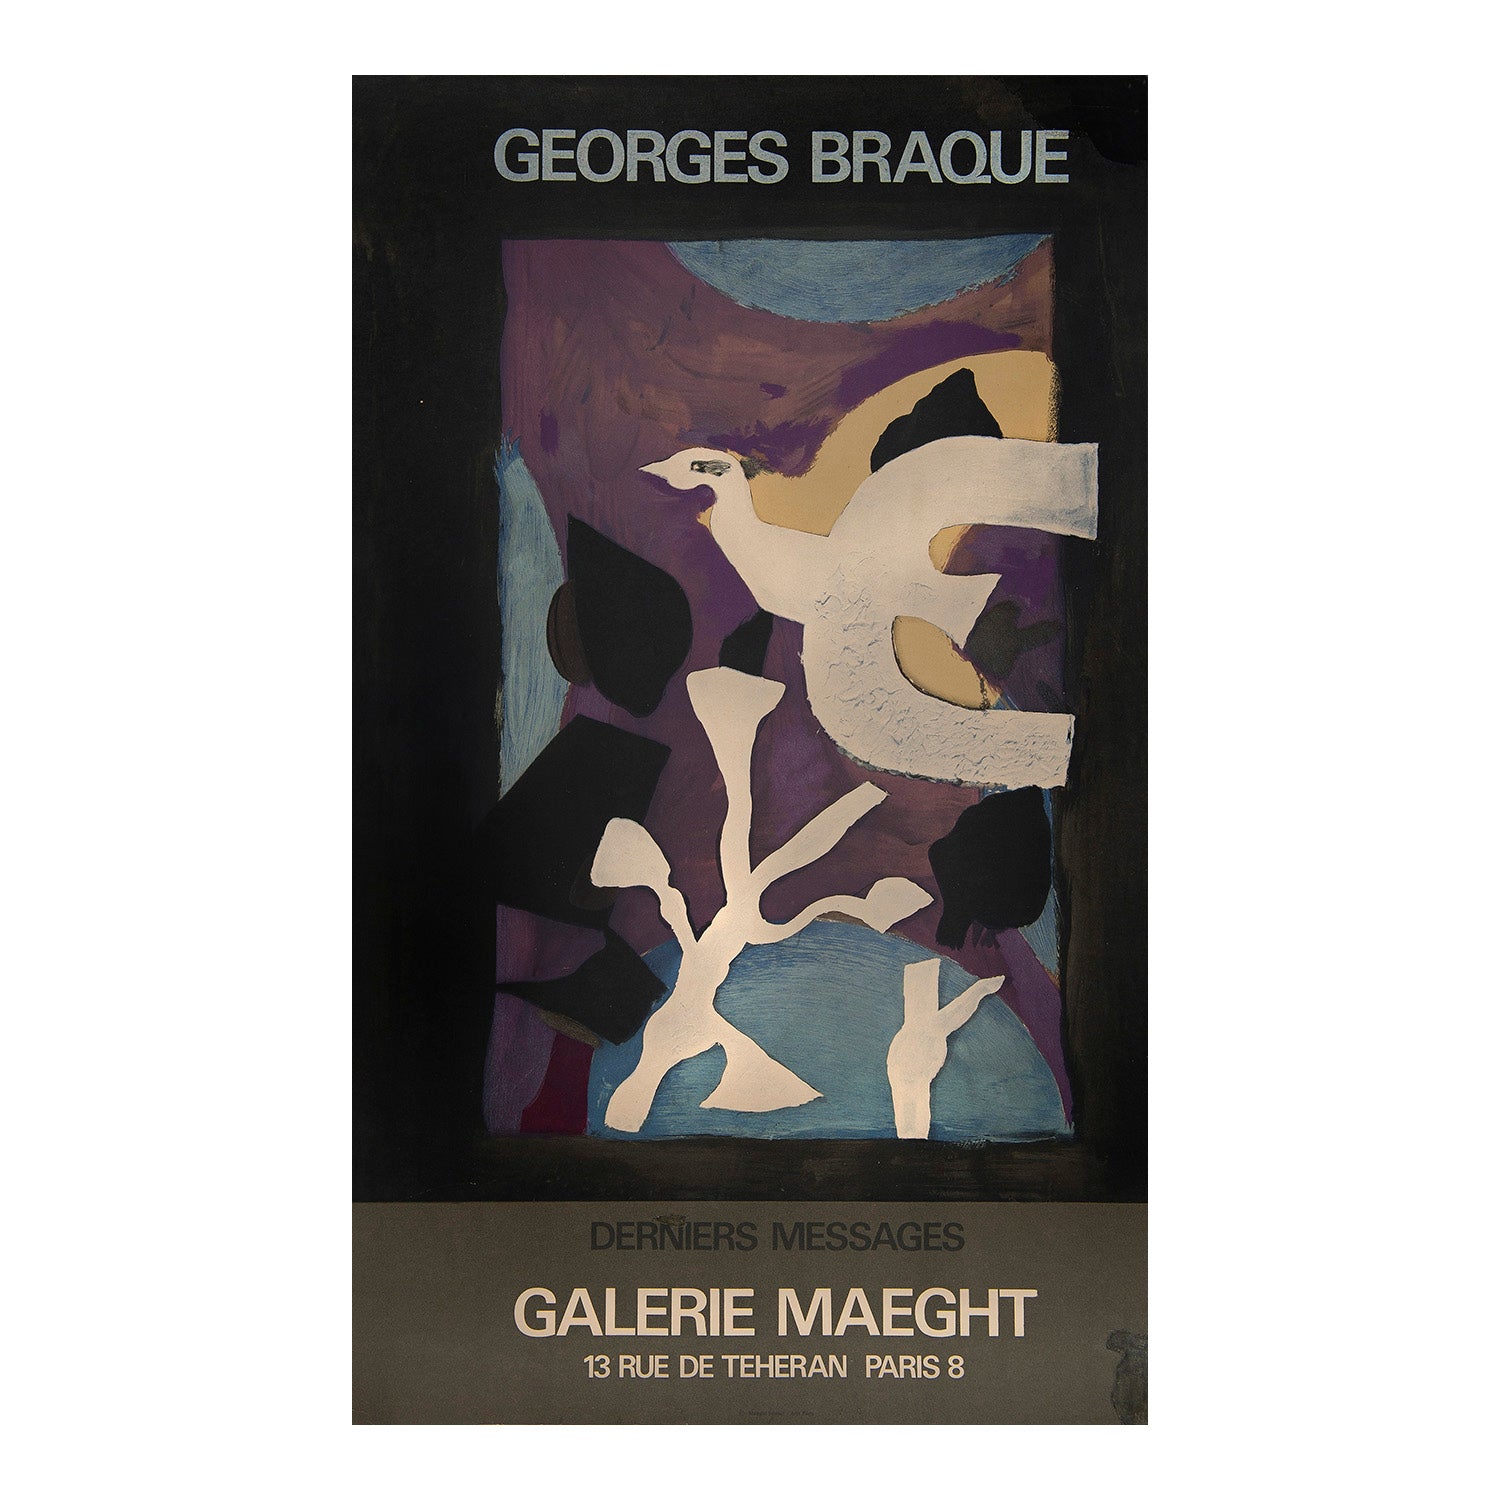 An original exhibition poster for Geroges Braque, 1967. The design shows an abstract bird flying past some trees in a minimal colour palette. 